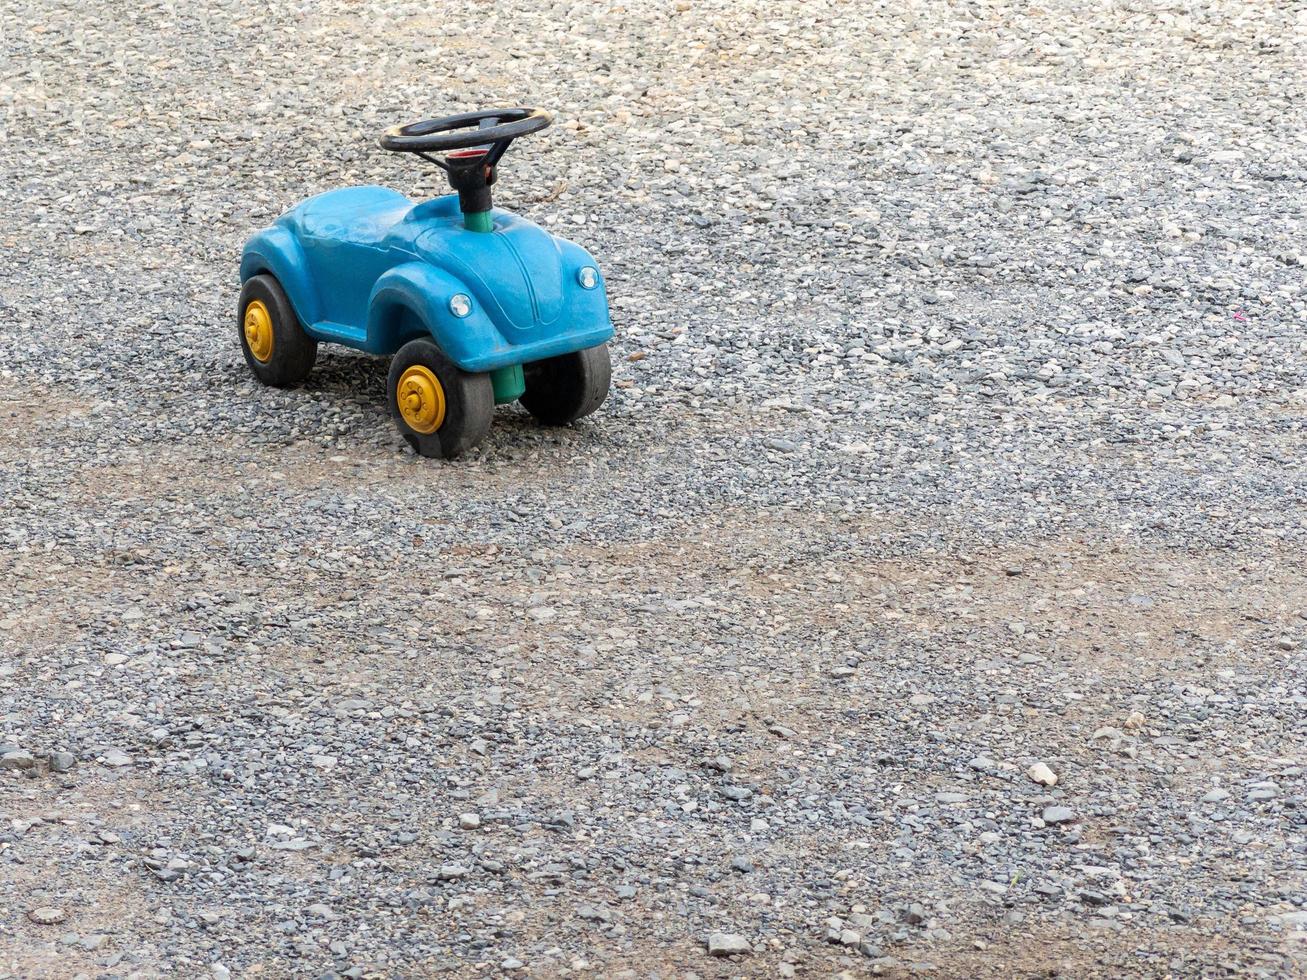 The plastic toy car with the black steering wheel on the ground. photo